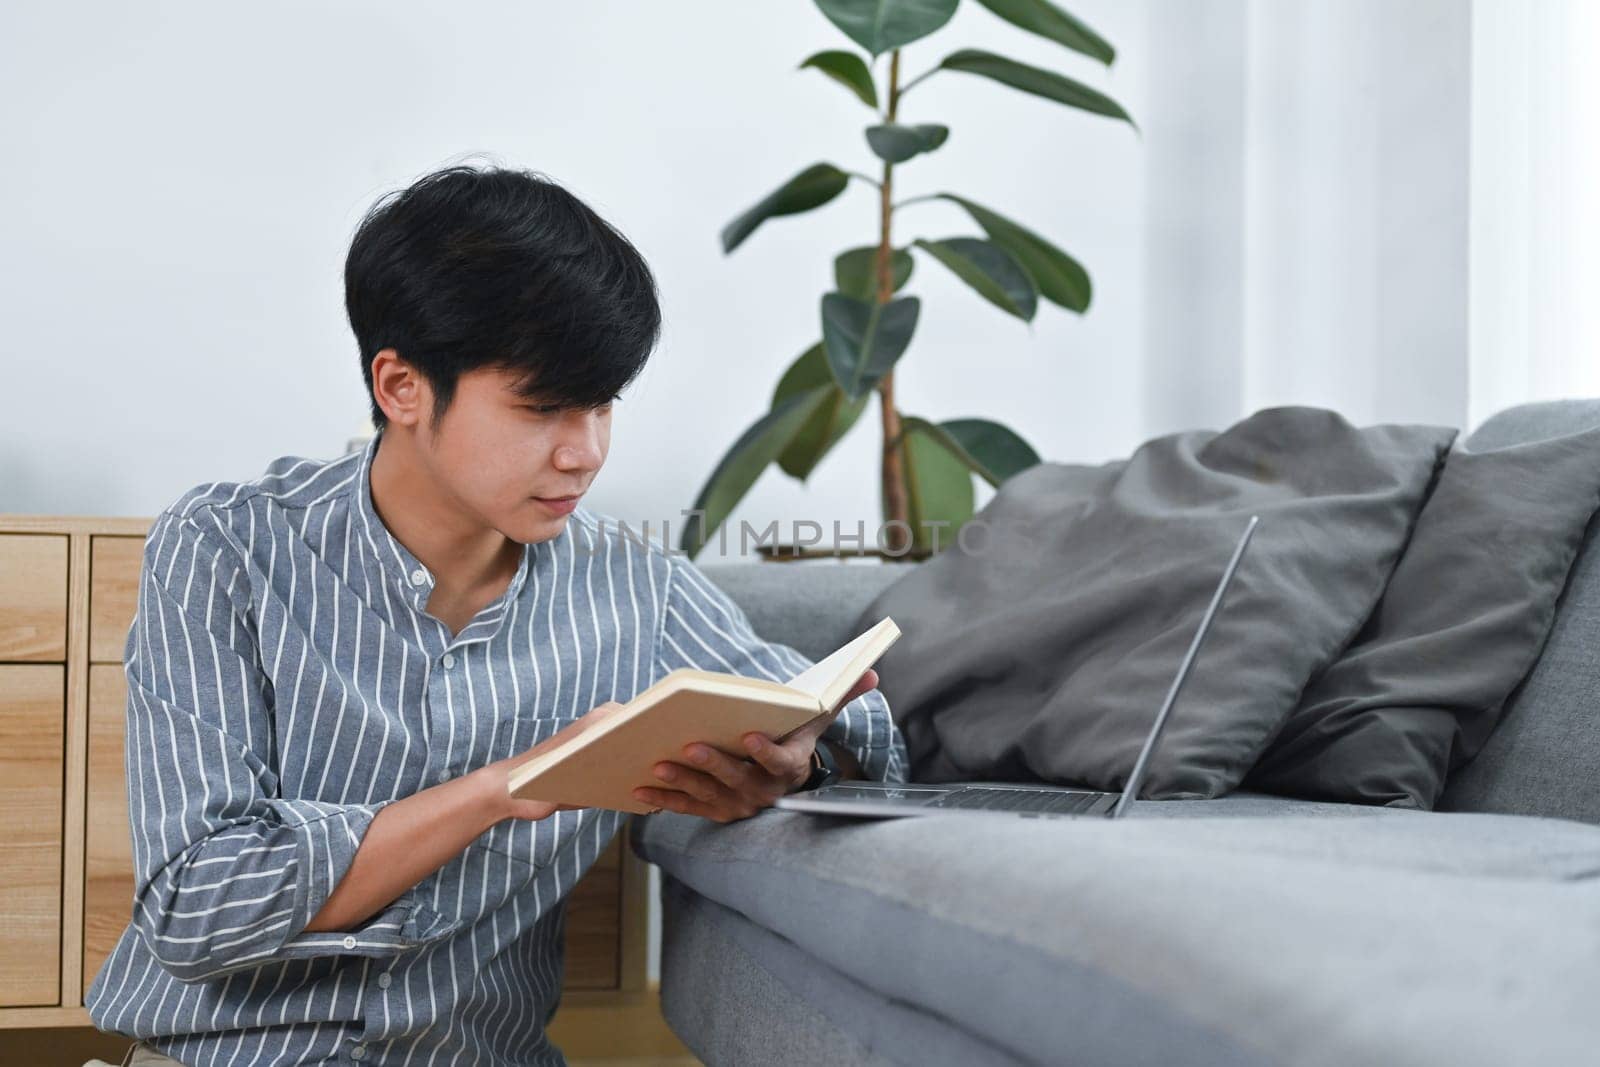 Pleasant asian man sitting on floor and reading book, spending leisure time at home. Leisure and people concept.